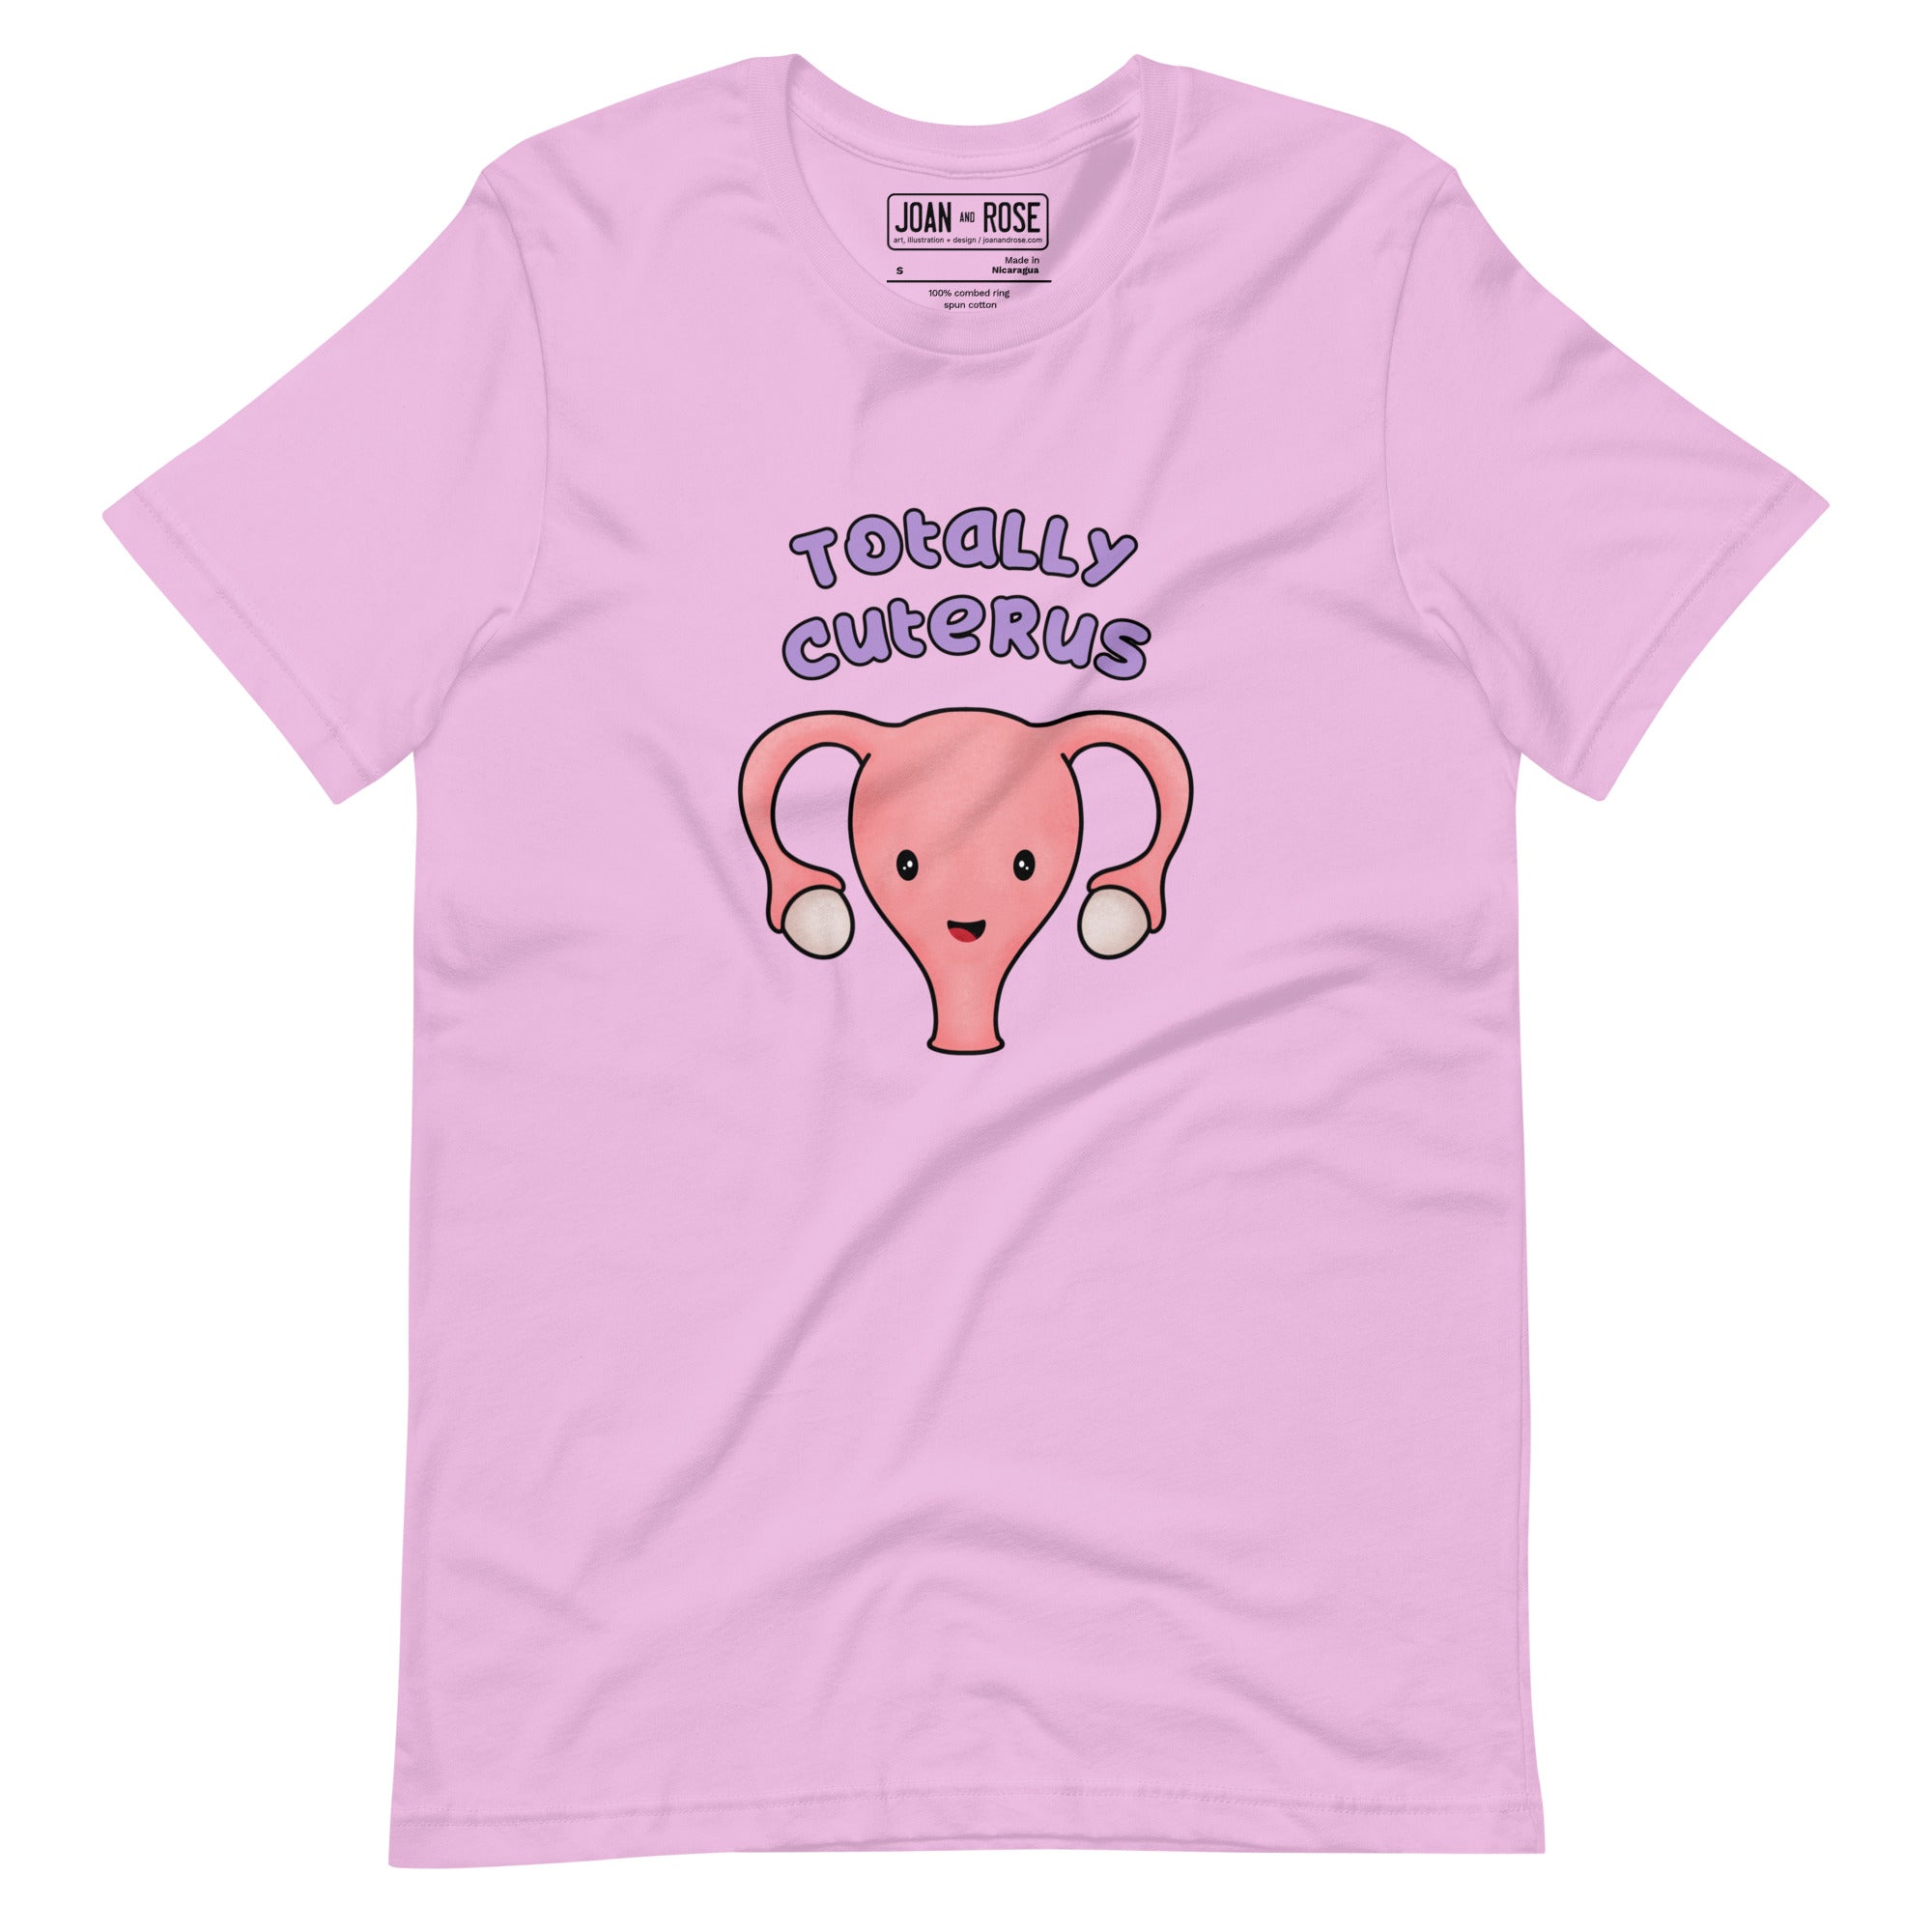 Lilac coloured t-shirt with an illustration of a cute uterus character smiling with the text in purple 'Totally Cuterus'